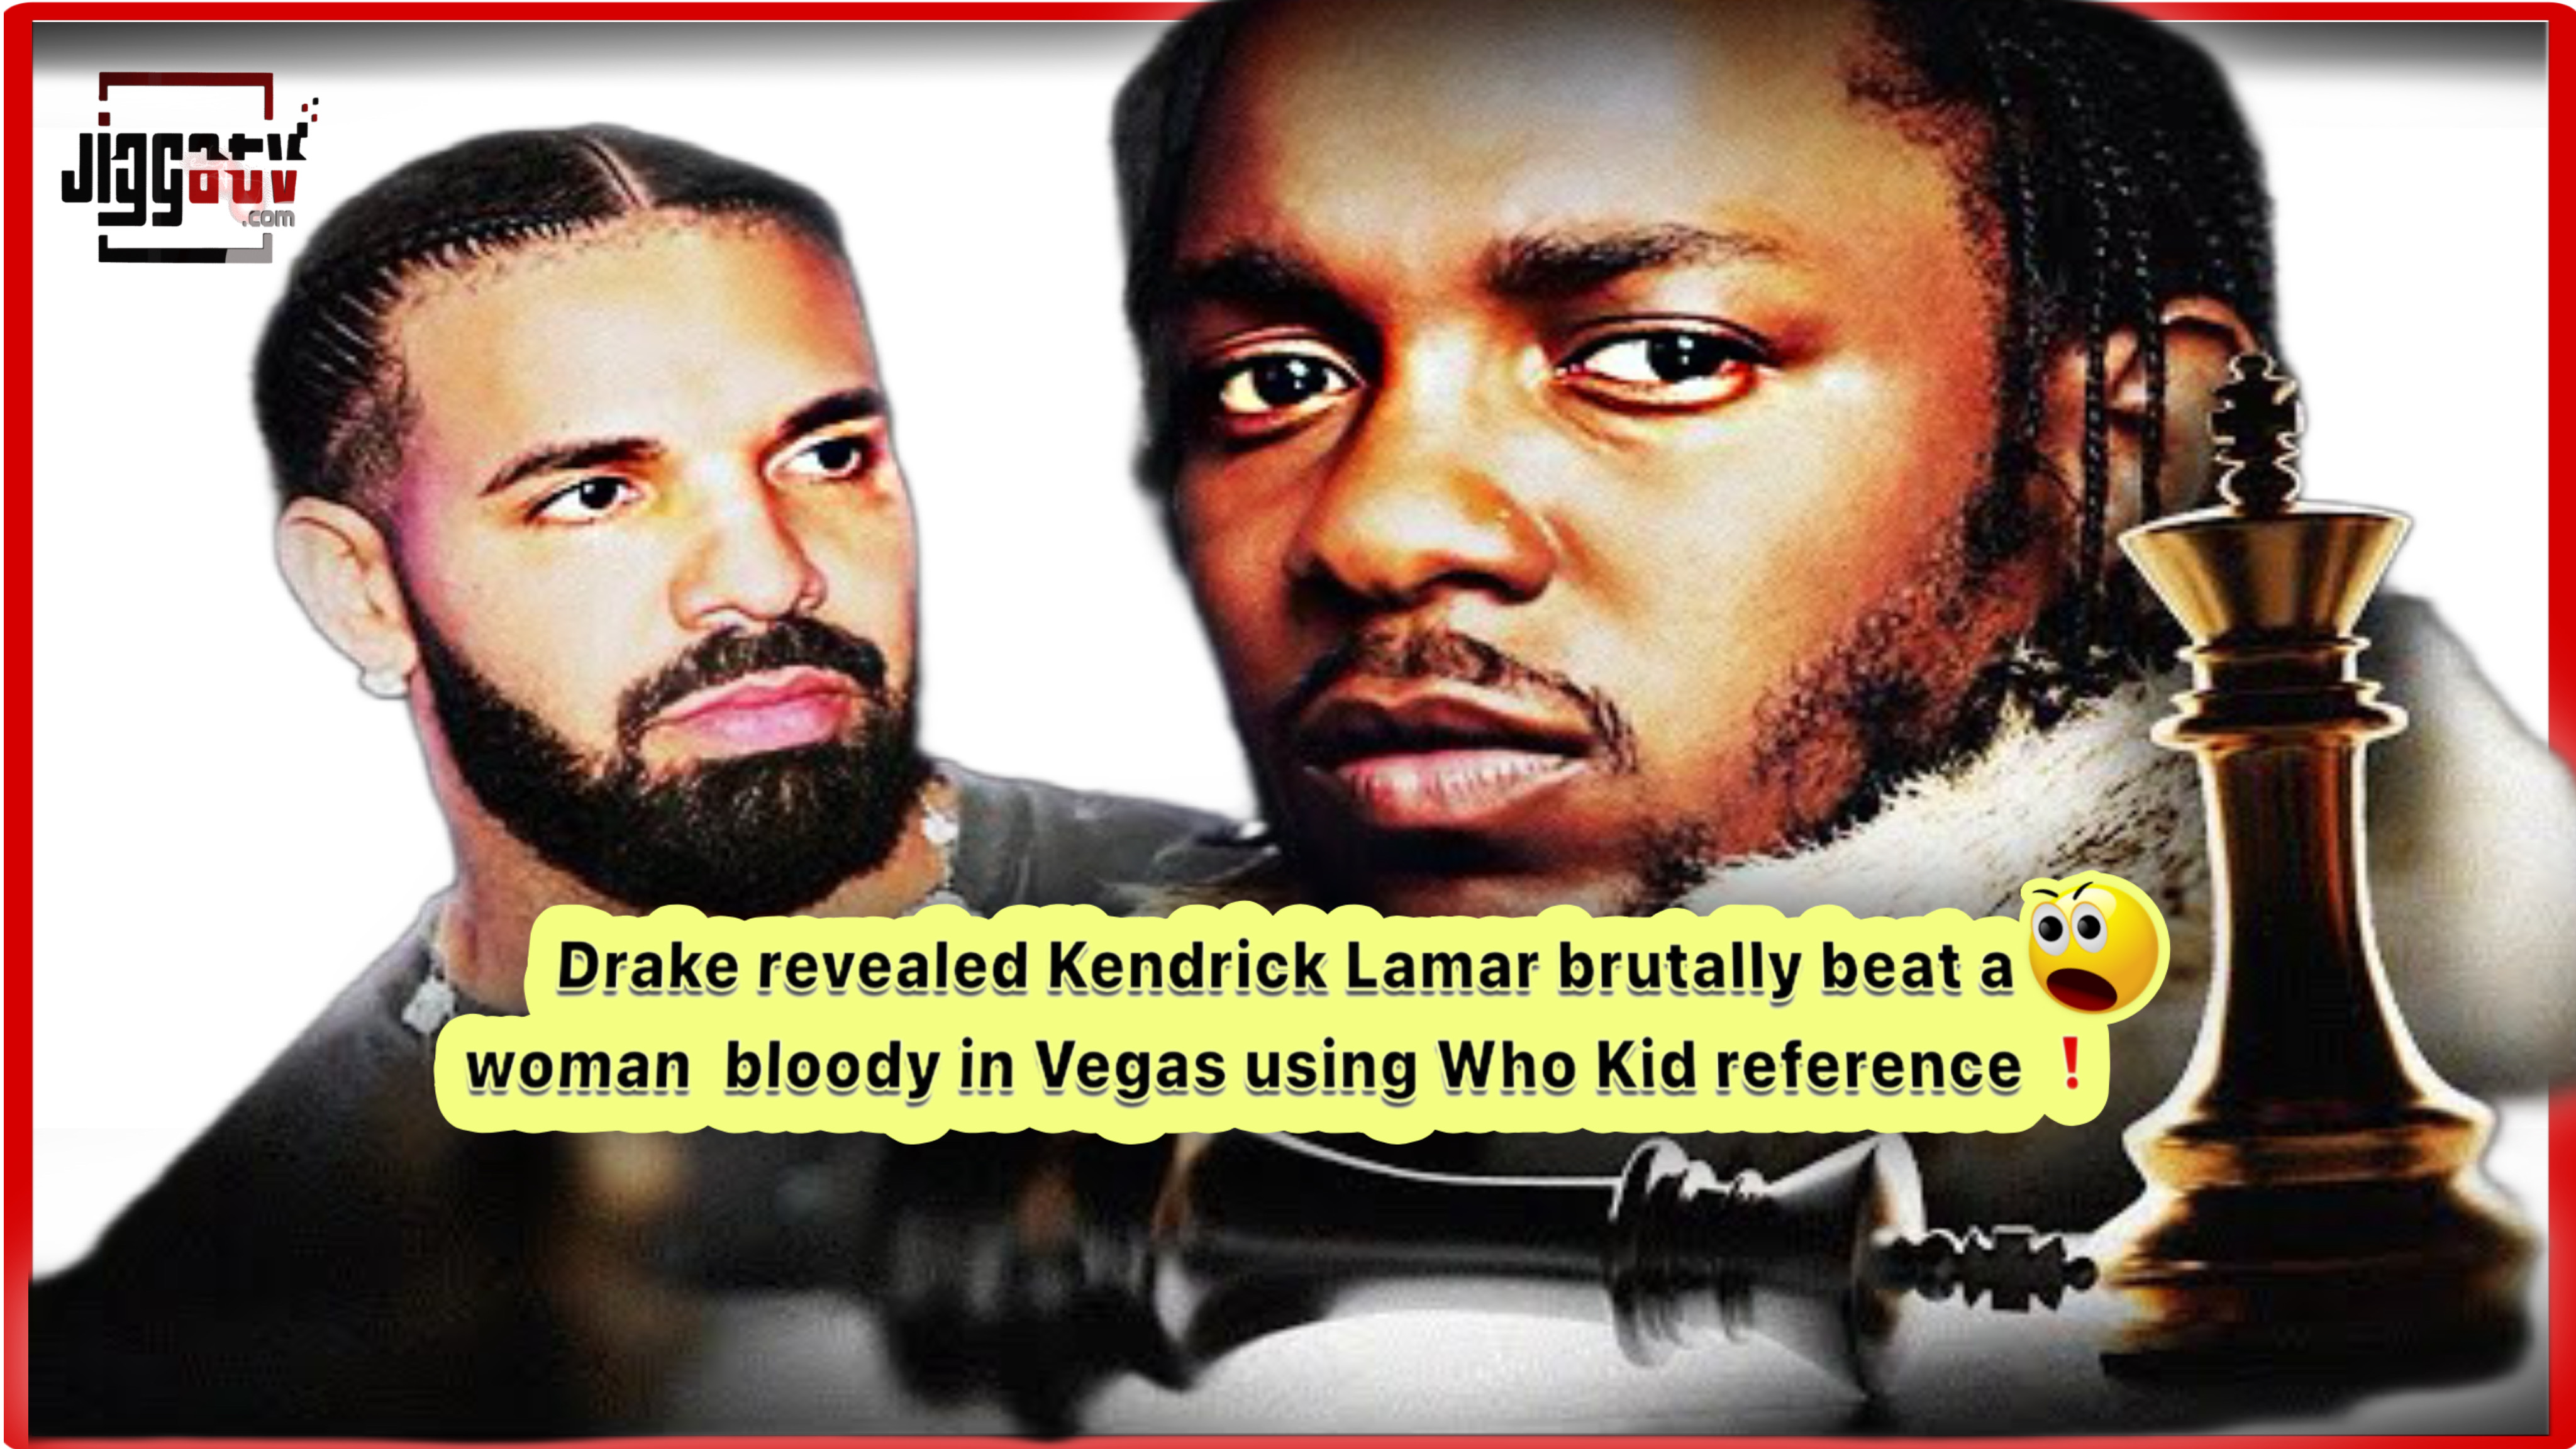 Drake revealed Kendrick Lamar brutally beat a woman bloody in Vegas using Who Kid reference ❗️🤦🏾‍♂️